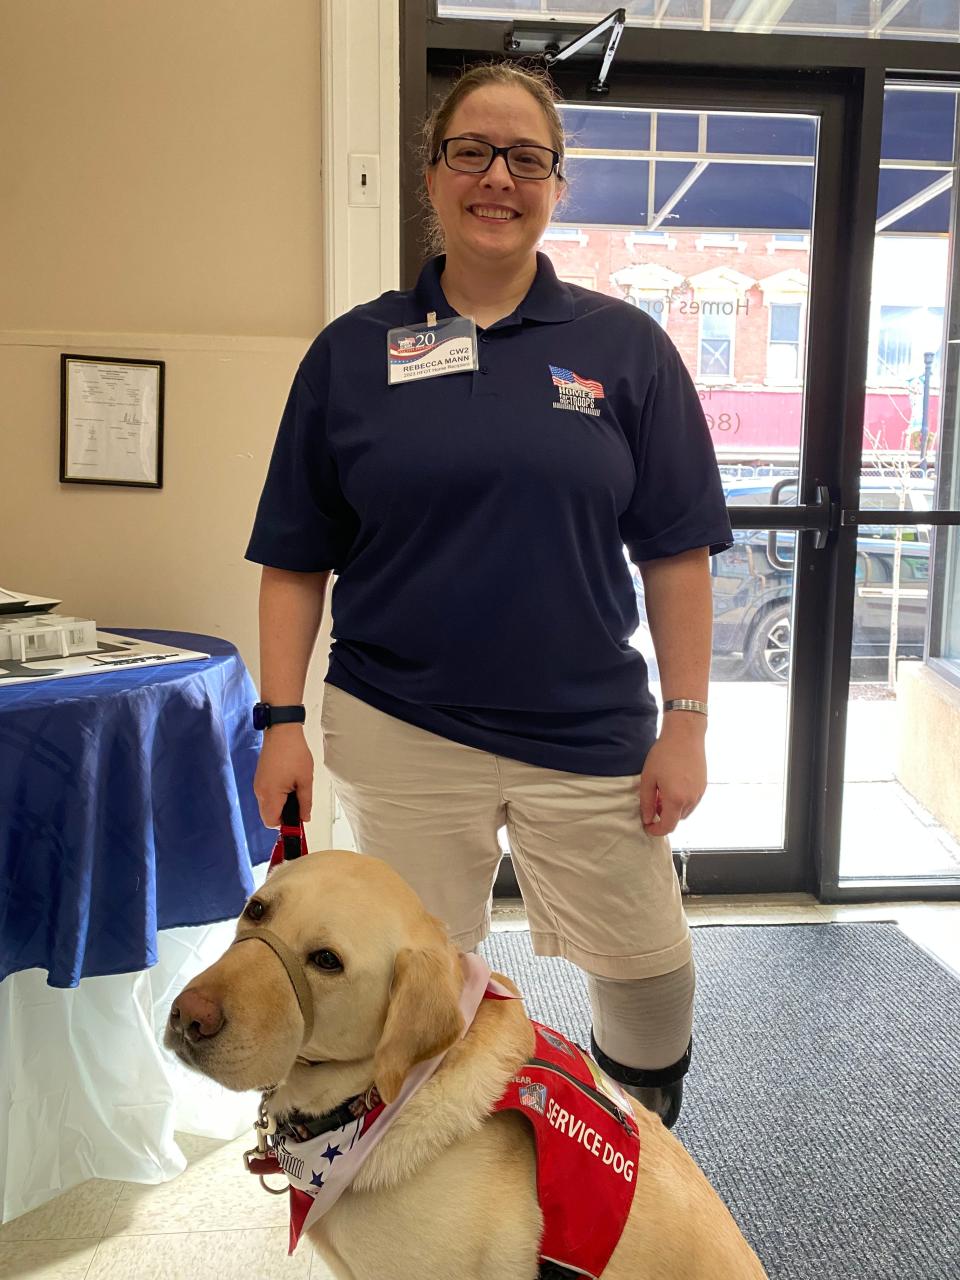 Homes for our Troops 2023 recipient Rebecca Mann of Mattapoisett, a U.S. Army veteran, and her service dog, Sully, attend the organization's 20-year anniversary celebration on Tuesday, Feb. 6, 2024 in downtown Taunton.